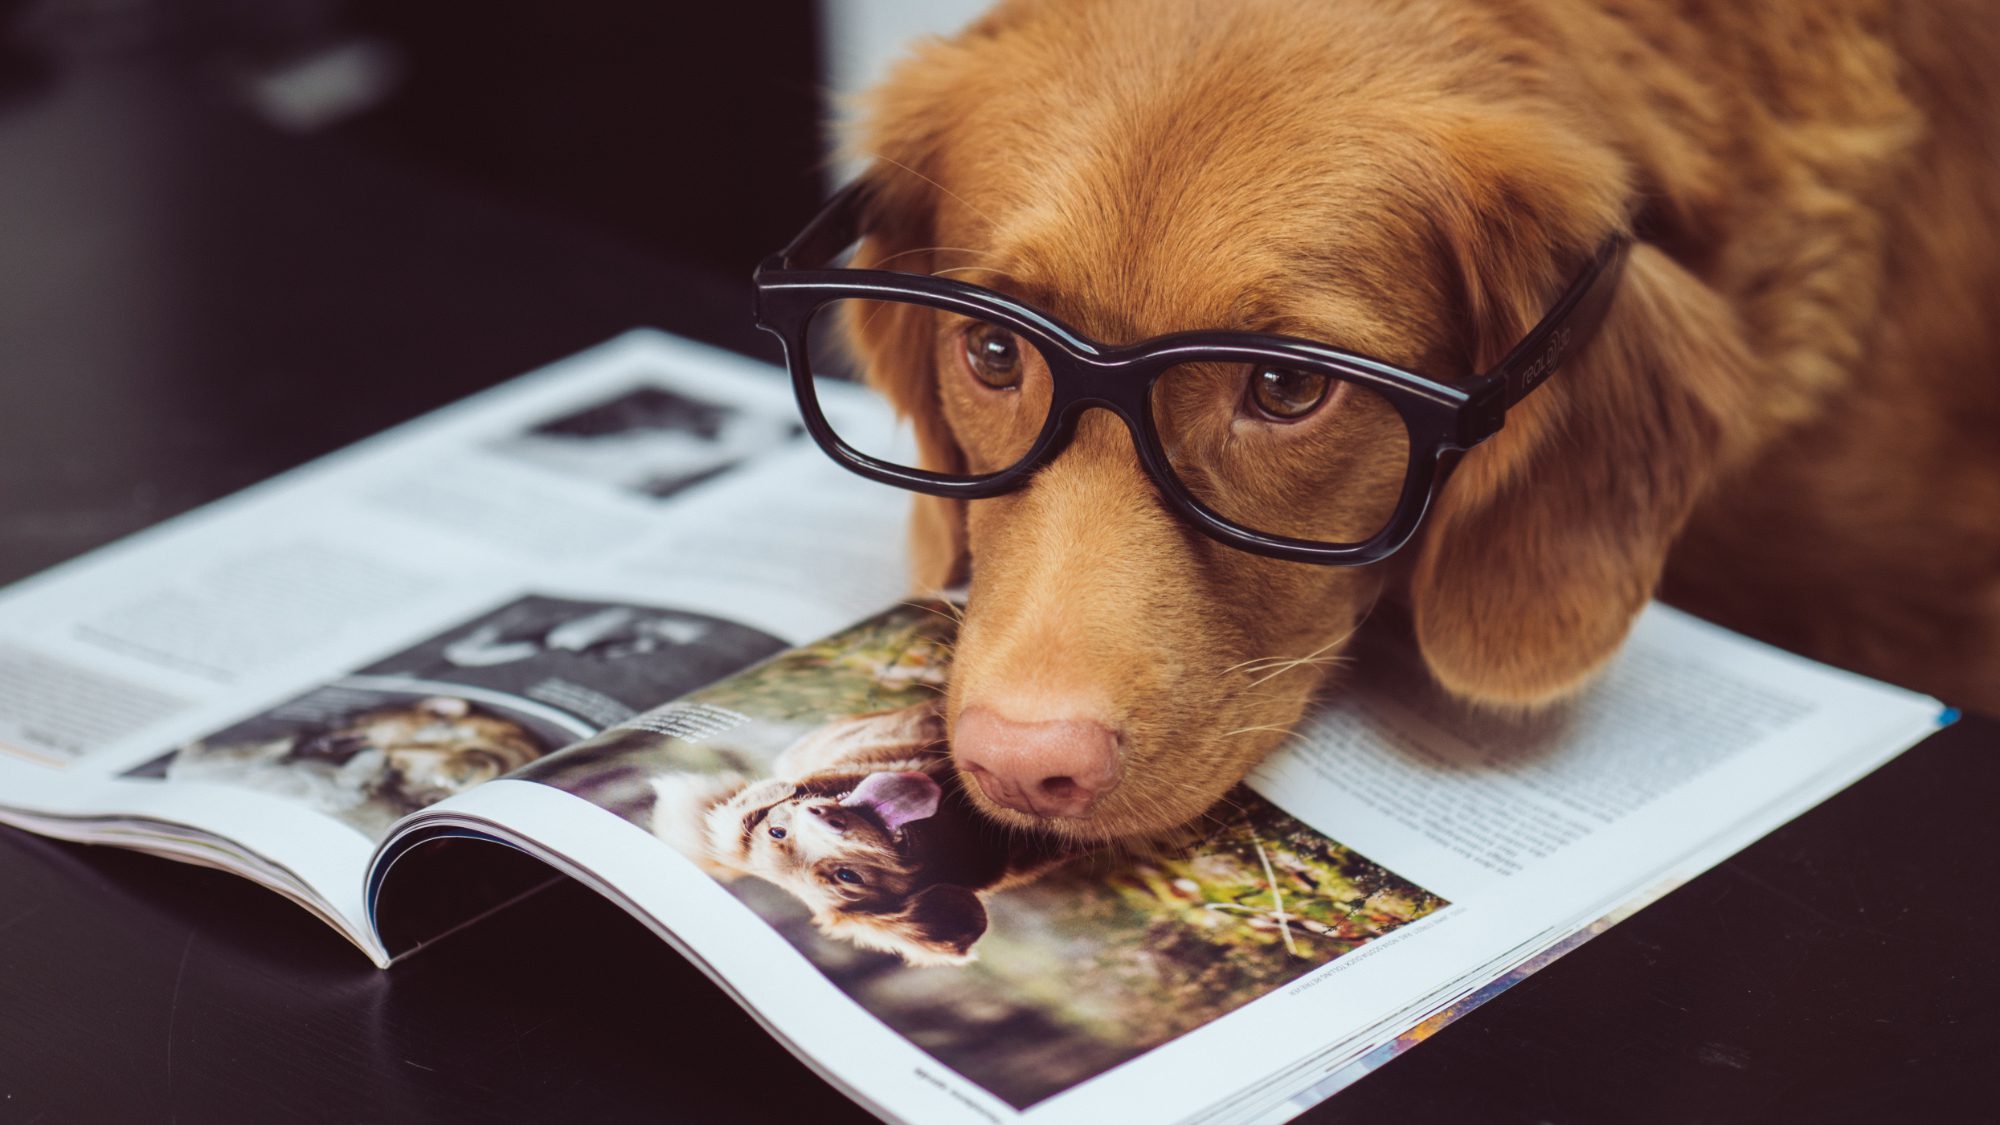 Dog wearing glasses with his head on an open magazine showing a photo of the dog.